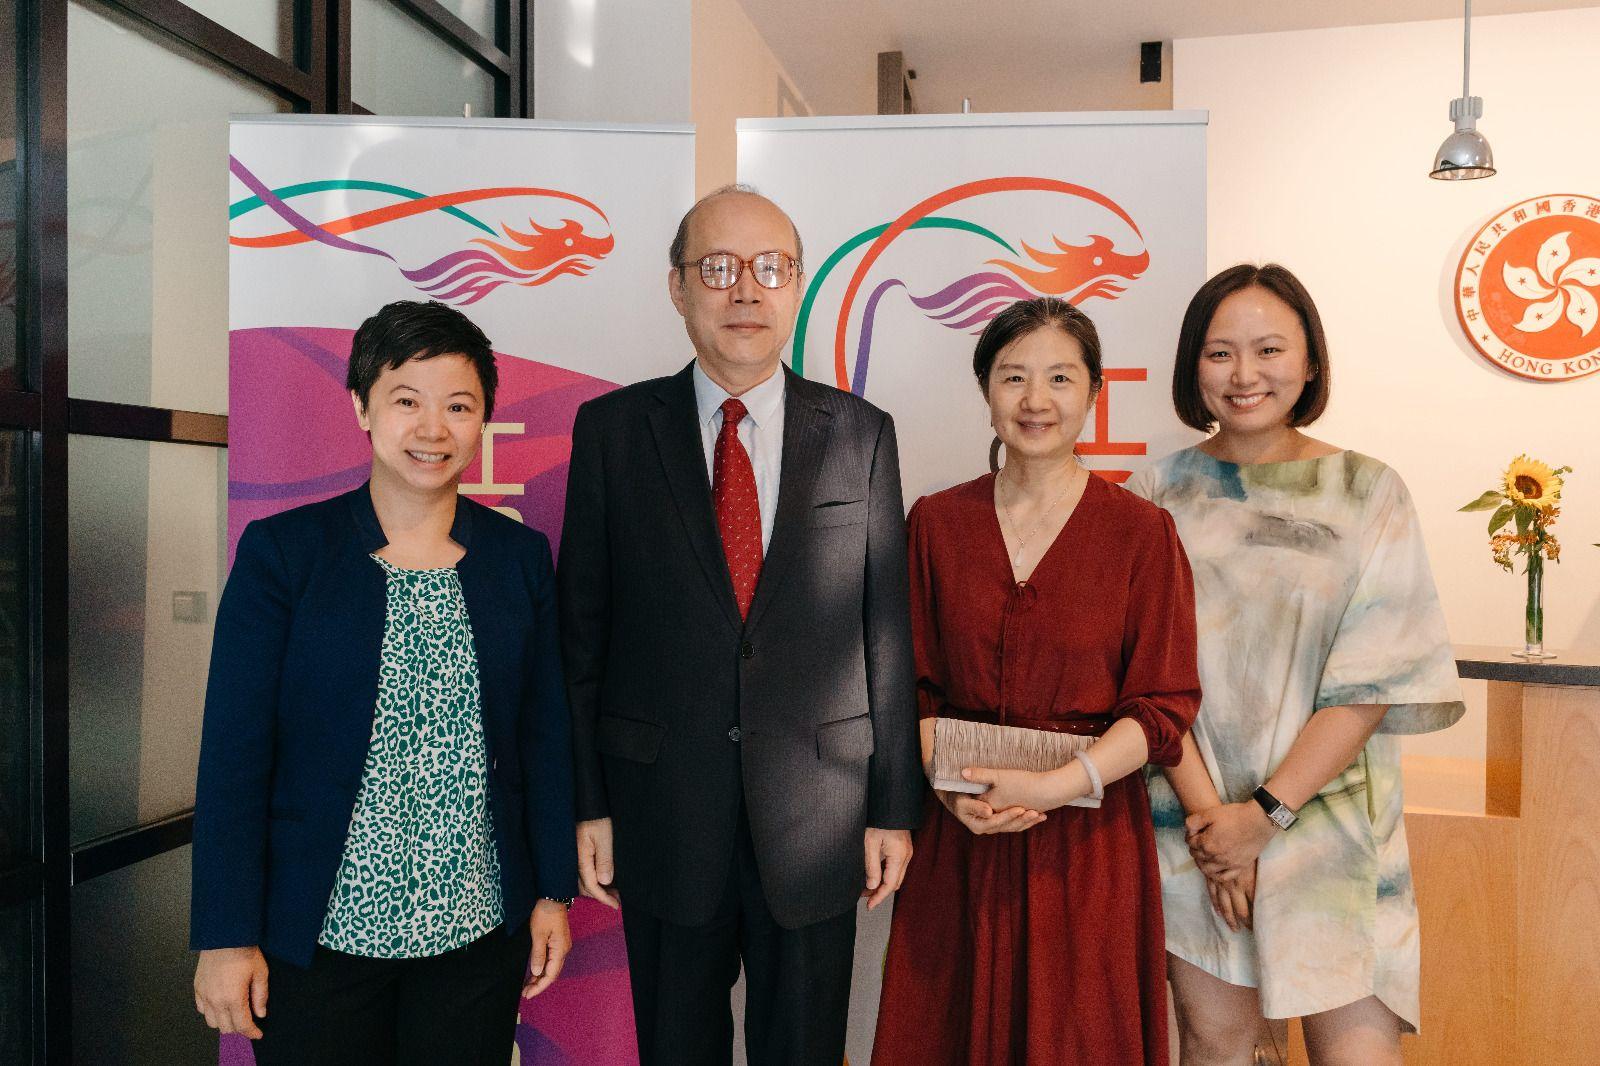 The Acting Permanent Representative of the Hong Kong Special Administrative Region of China to the World Trade Organization, Ms Drew Lai (left), and Deputy Representative, Ms Helen Kwan (right), photographed at the reception with the Ambassador Extraordinary and Plenipotentiary of the People's Republic of China to the United Nations Office at Geneva and Other International Organizations in Switzerland, Mr Chen Xu.